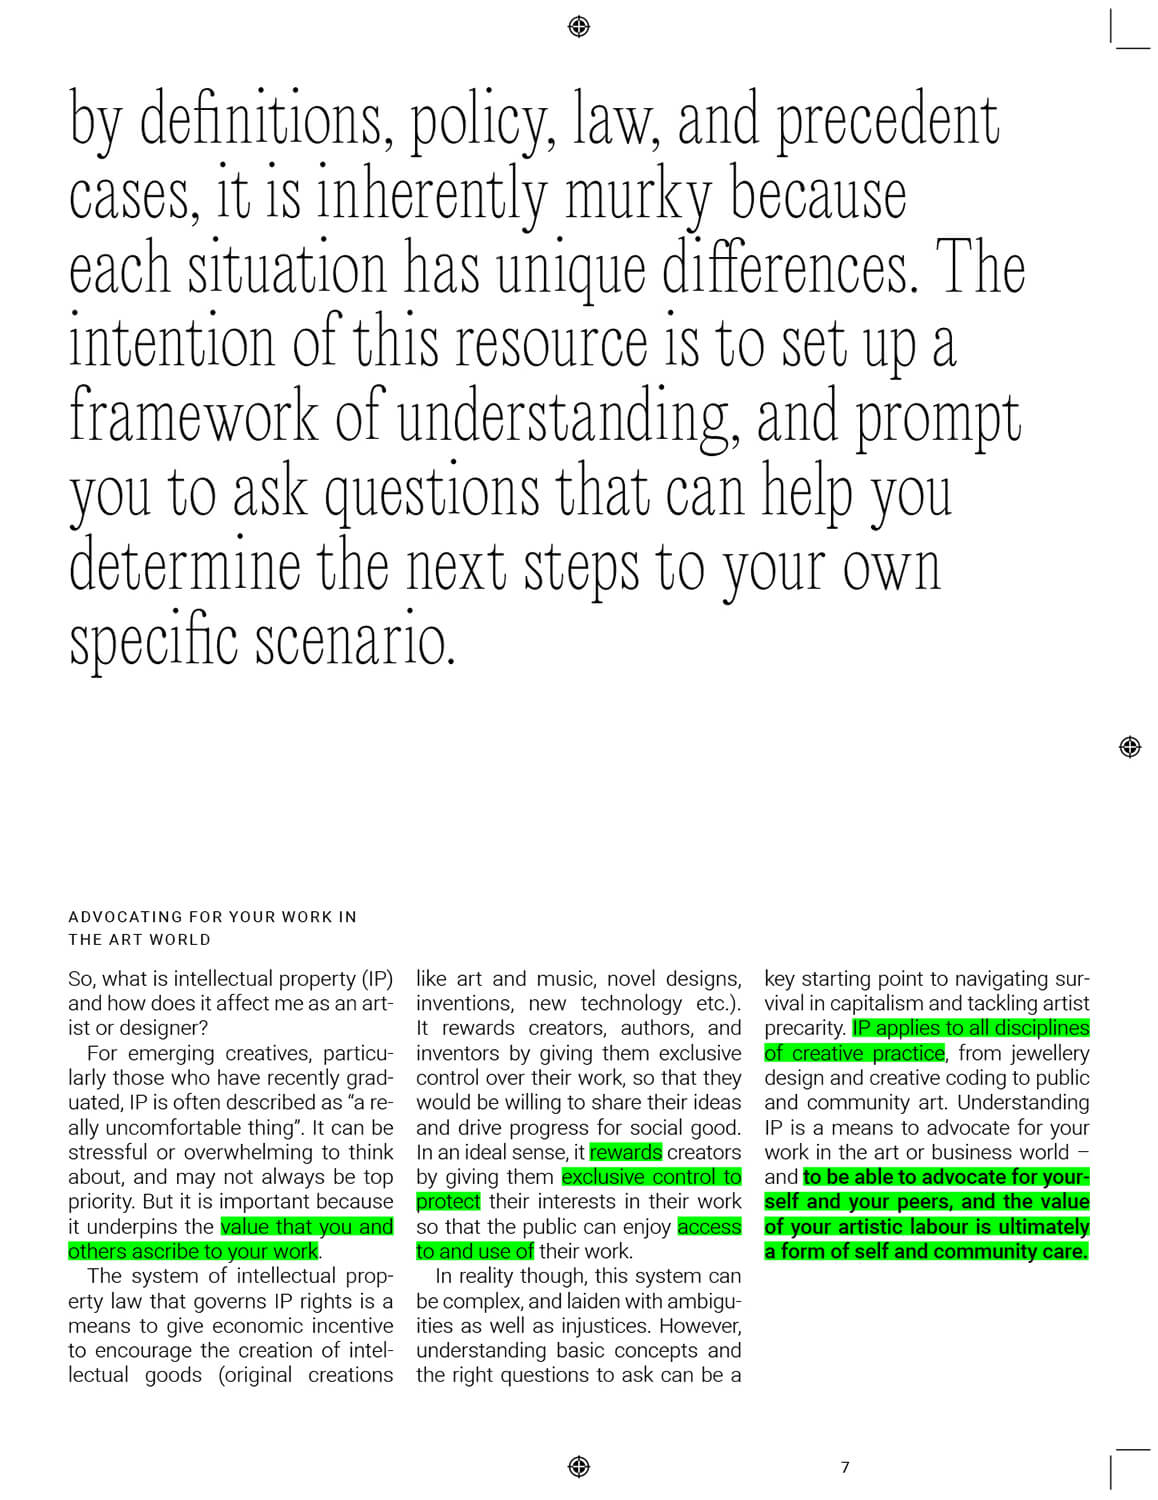 How to make a website: Page 07